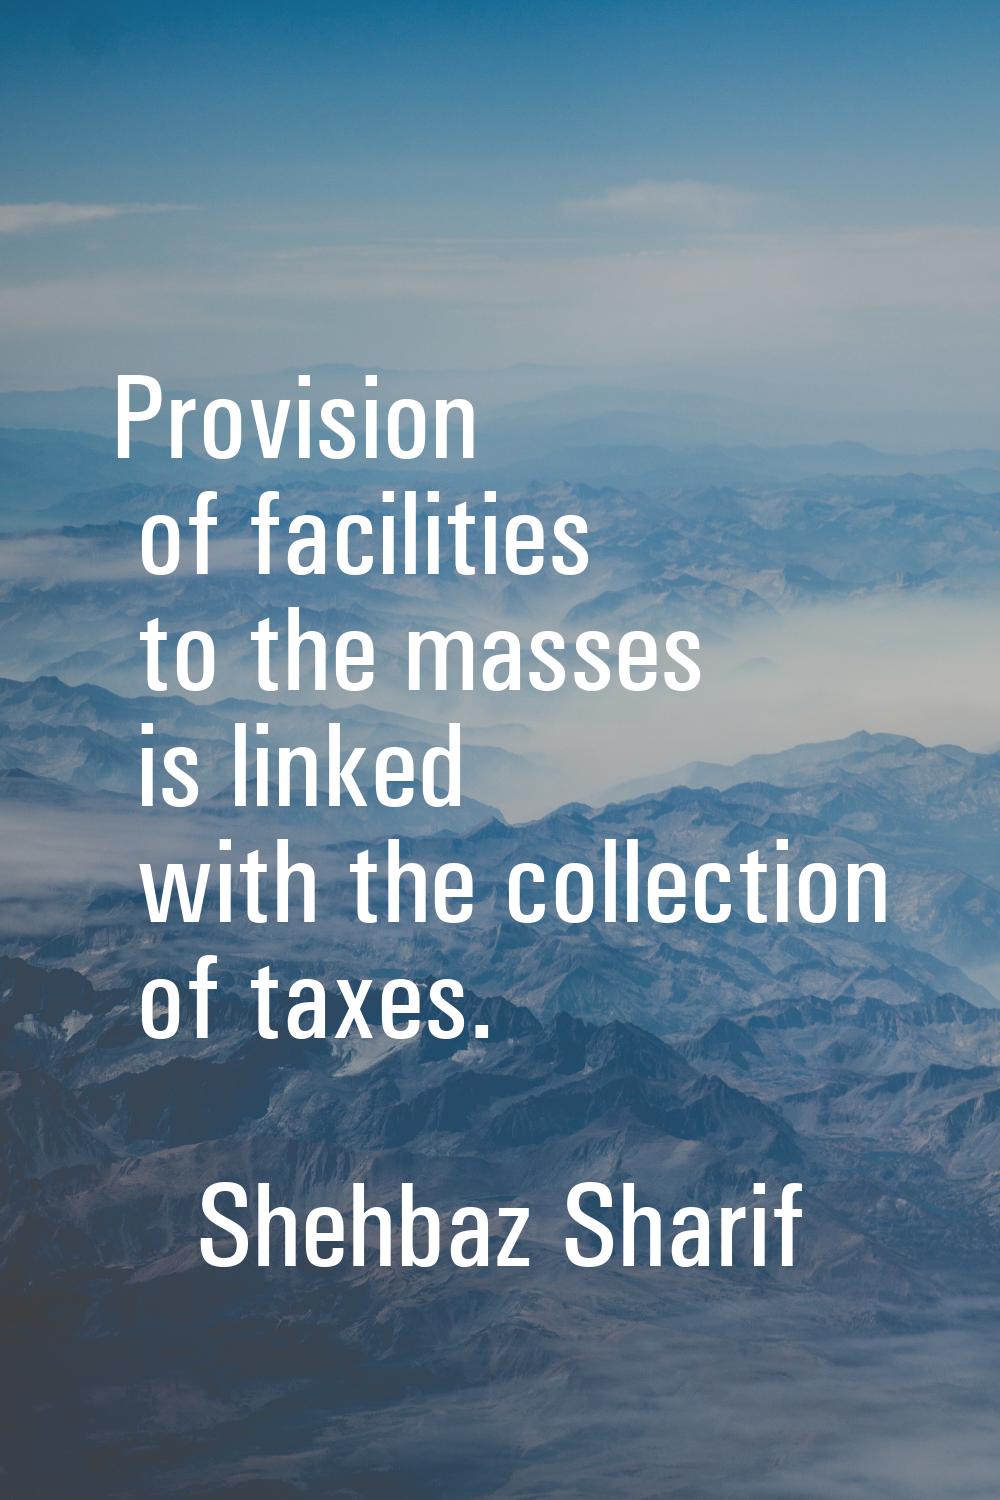 Provision of facilities to the masses is linked with the collection of taxes.